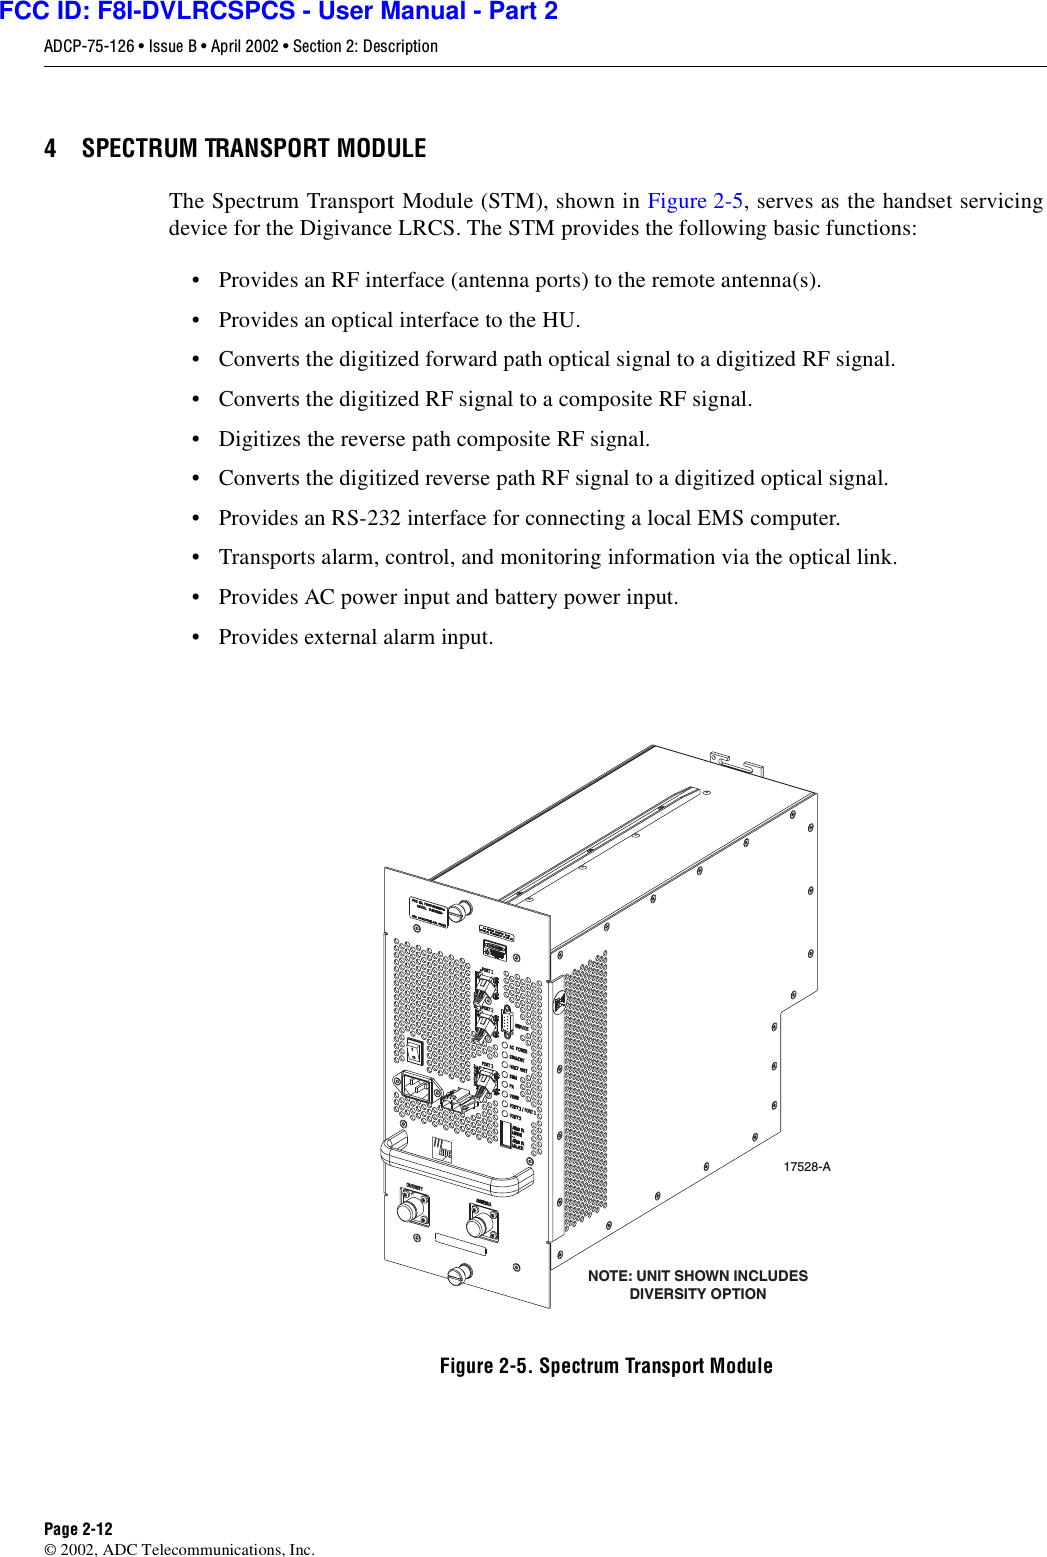 ADCP-75-126 • Issue B • April 2002 • Section 2: DescriptionPage 2-12©2002, ADC Telecommunications, Inc.4 SPECTRUM TRANSPORT MODULEThe Spectrum Transport Module (STM), shown in Figure 2-5,serves as the handset servicingdevice for the Digivance LRCS. The STM provides the following basic functions:• Provides an RF interface (antenna ports) to the remote antenna(s).• Provides an optical interface to the HU.•Convertsthe digitized forward path optical signal to adigitized RF signal.•Convertsthe digitized RF signal to acomposite RF signal.• Digitizes the reverse path composite RF signal.•Convertsthe digitized reverse path RF signal to adigitized optical signal.• Provides an RS-232 interface for connecting alocal EMS computer.• Transports alarm, control, and monitoring information via the optical link.• Provides AC power input and battery power input.• Provides external alarm input.Figure 2-5. Spectrum Transport Module17528-ANOTE: UNIT SHOWN INCLUDESDIVERSITY OPTIONFCC ID: F8I-DVLRCSPCS - User Manual - Part 2